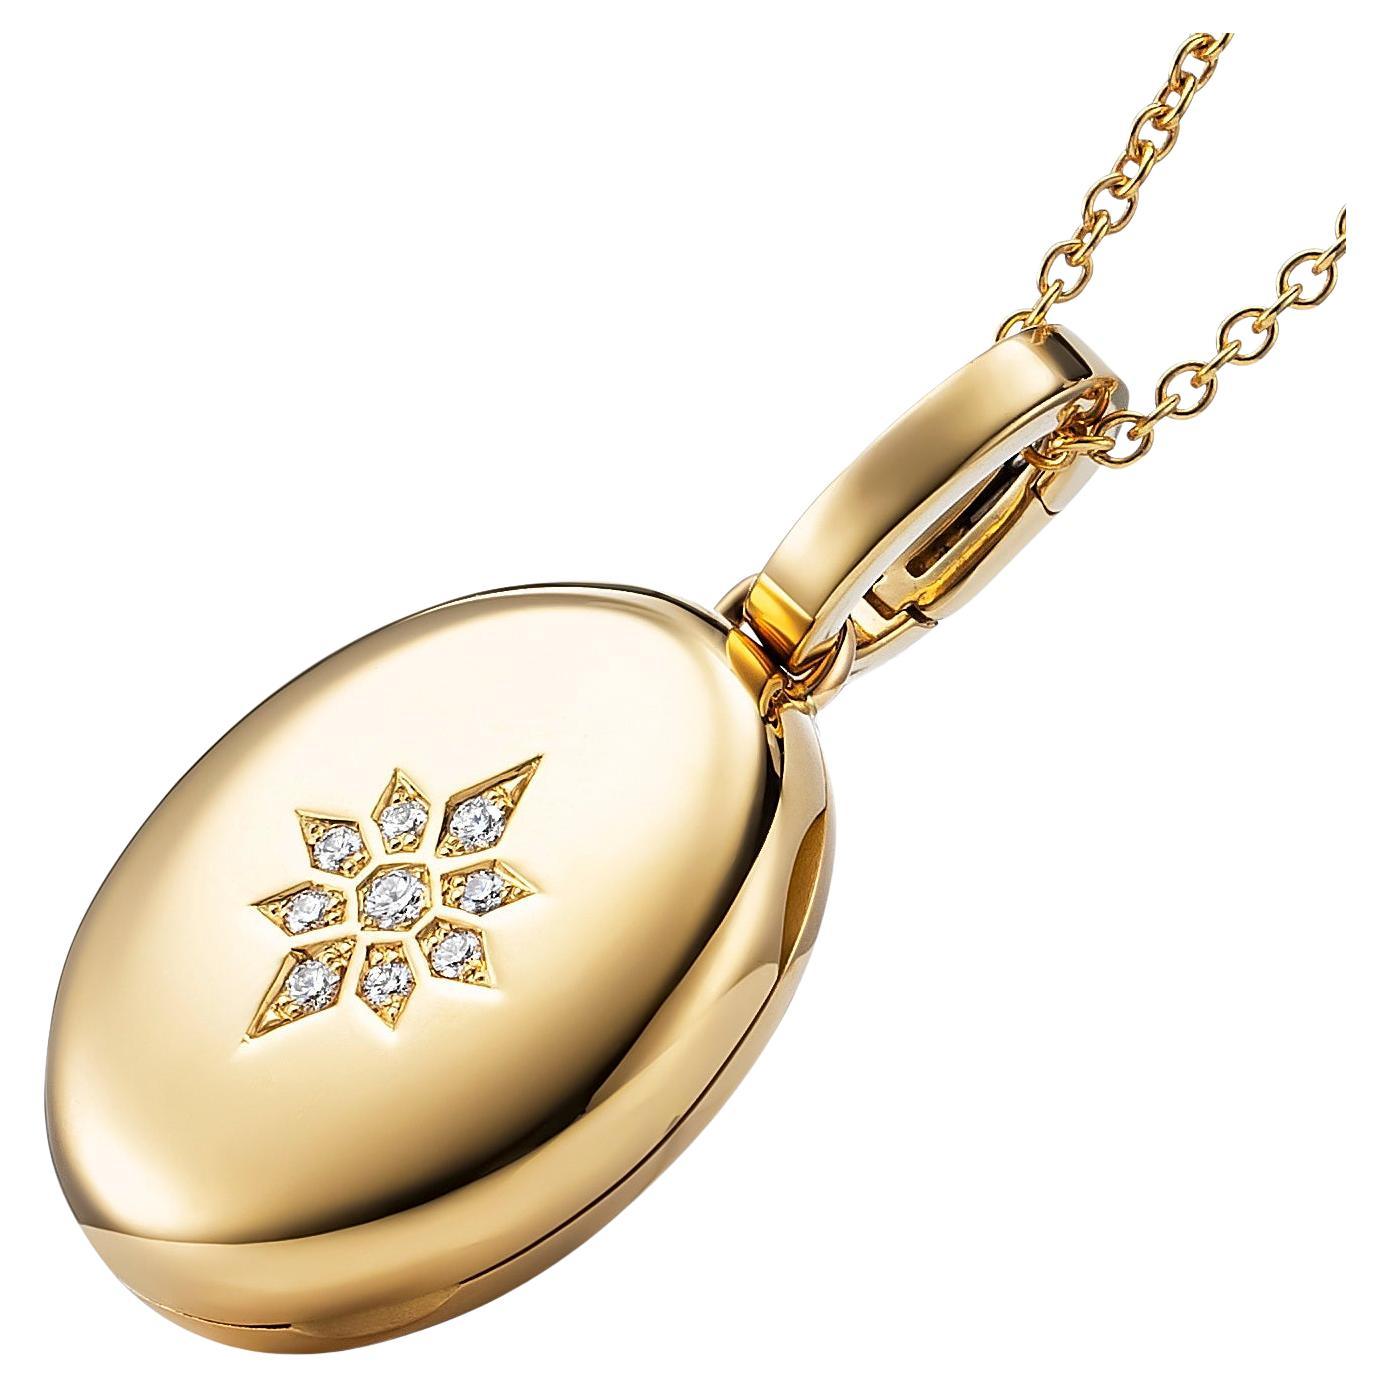 Heavy Oval Locket Pendant 18k Yellow Gold Star Motif with 9 Diamonds total 0.07 For Sale